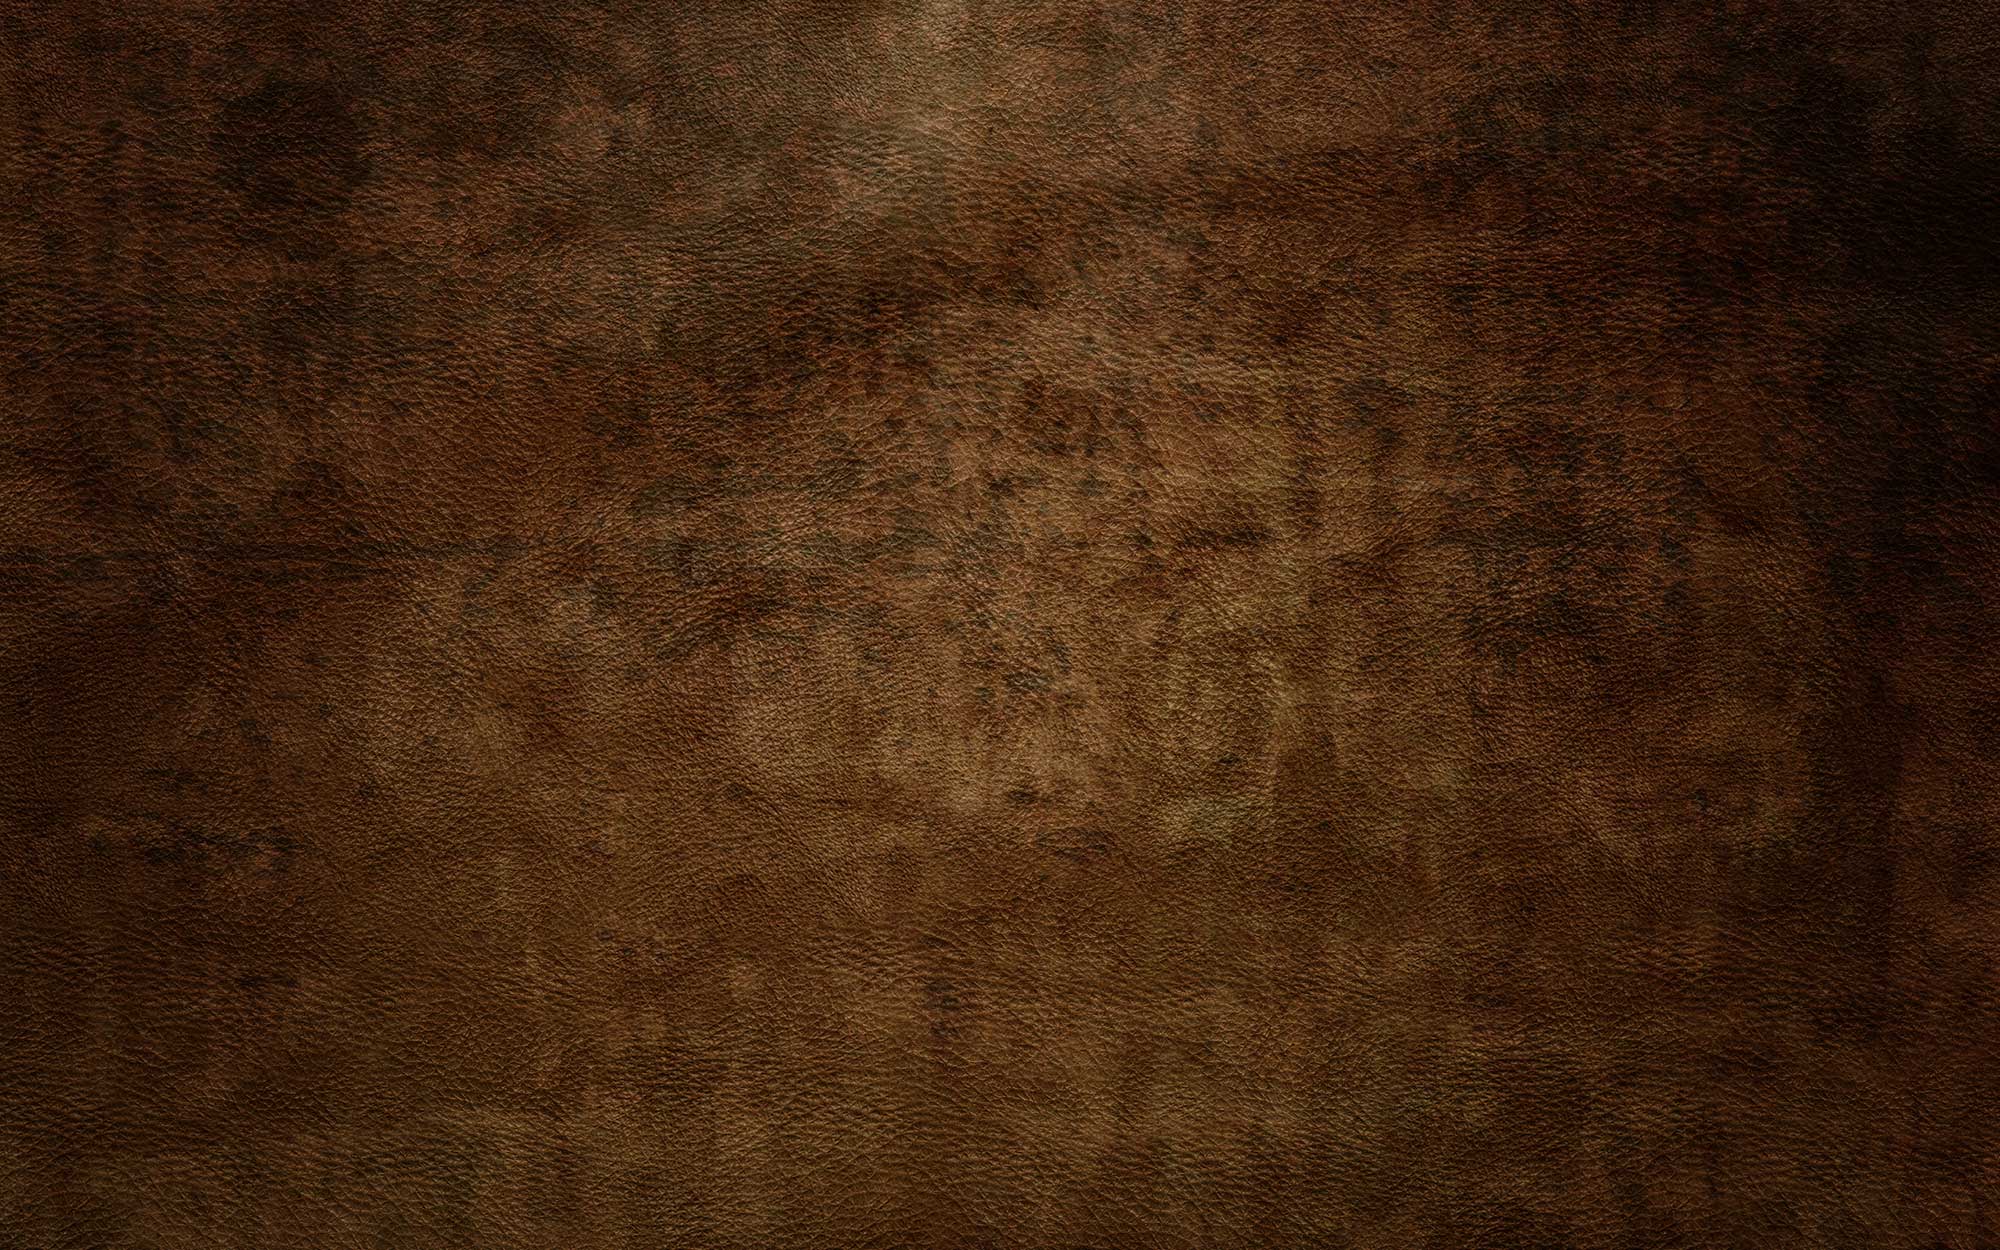 Leather Grunge Backgrounds